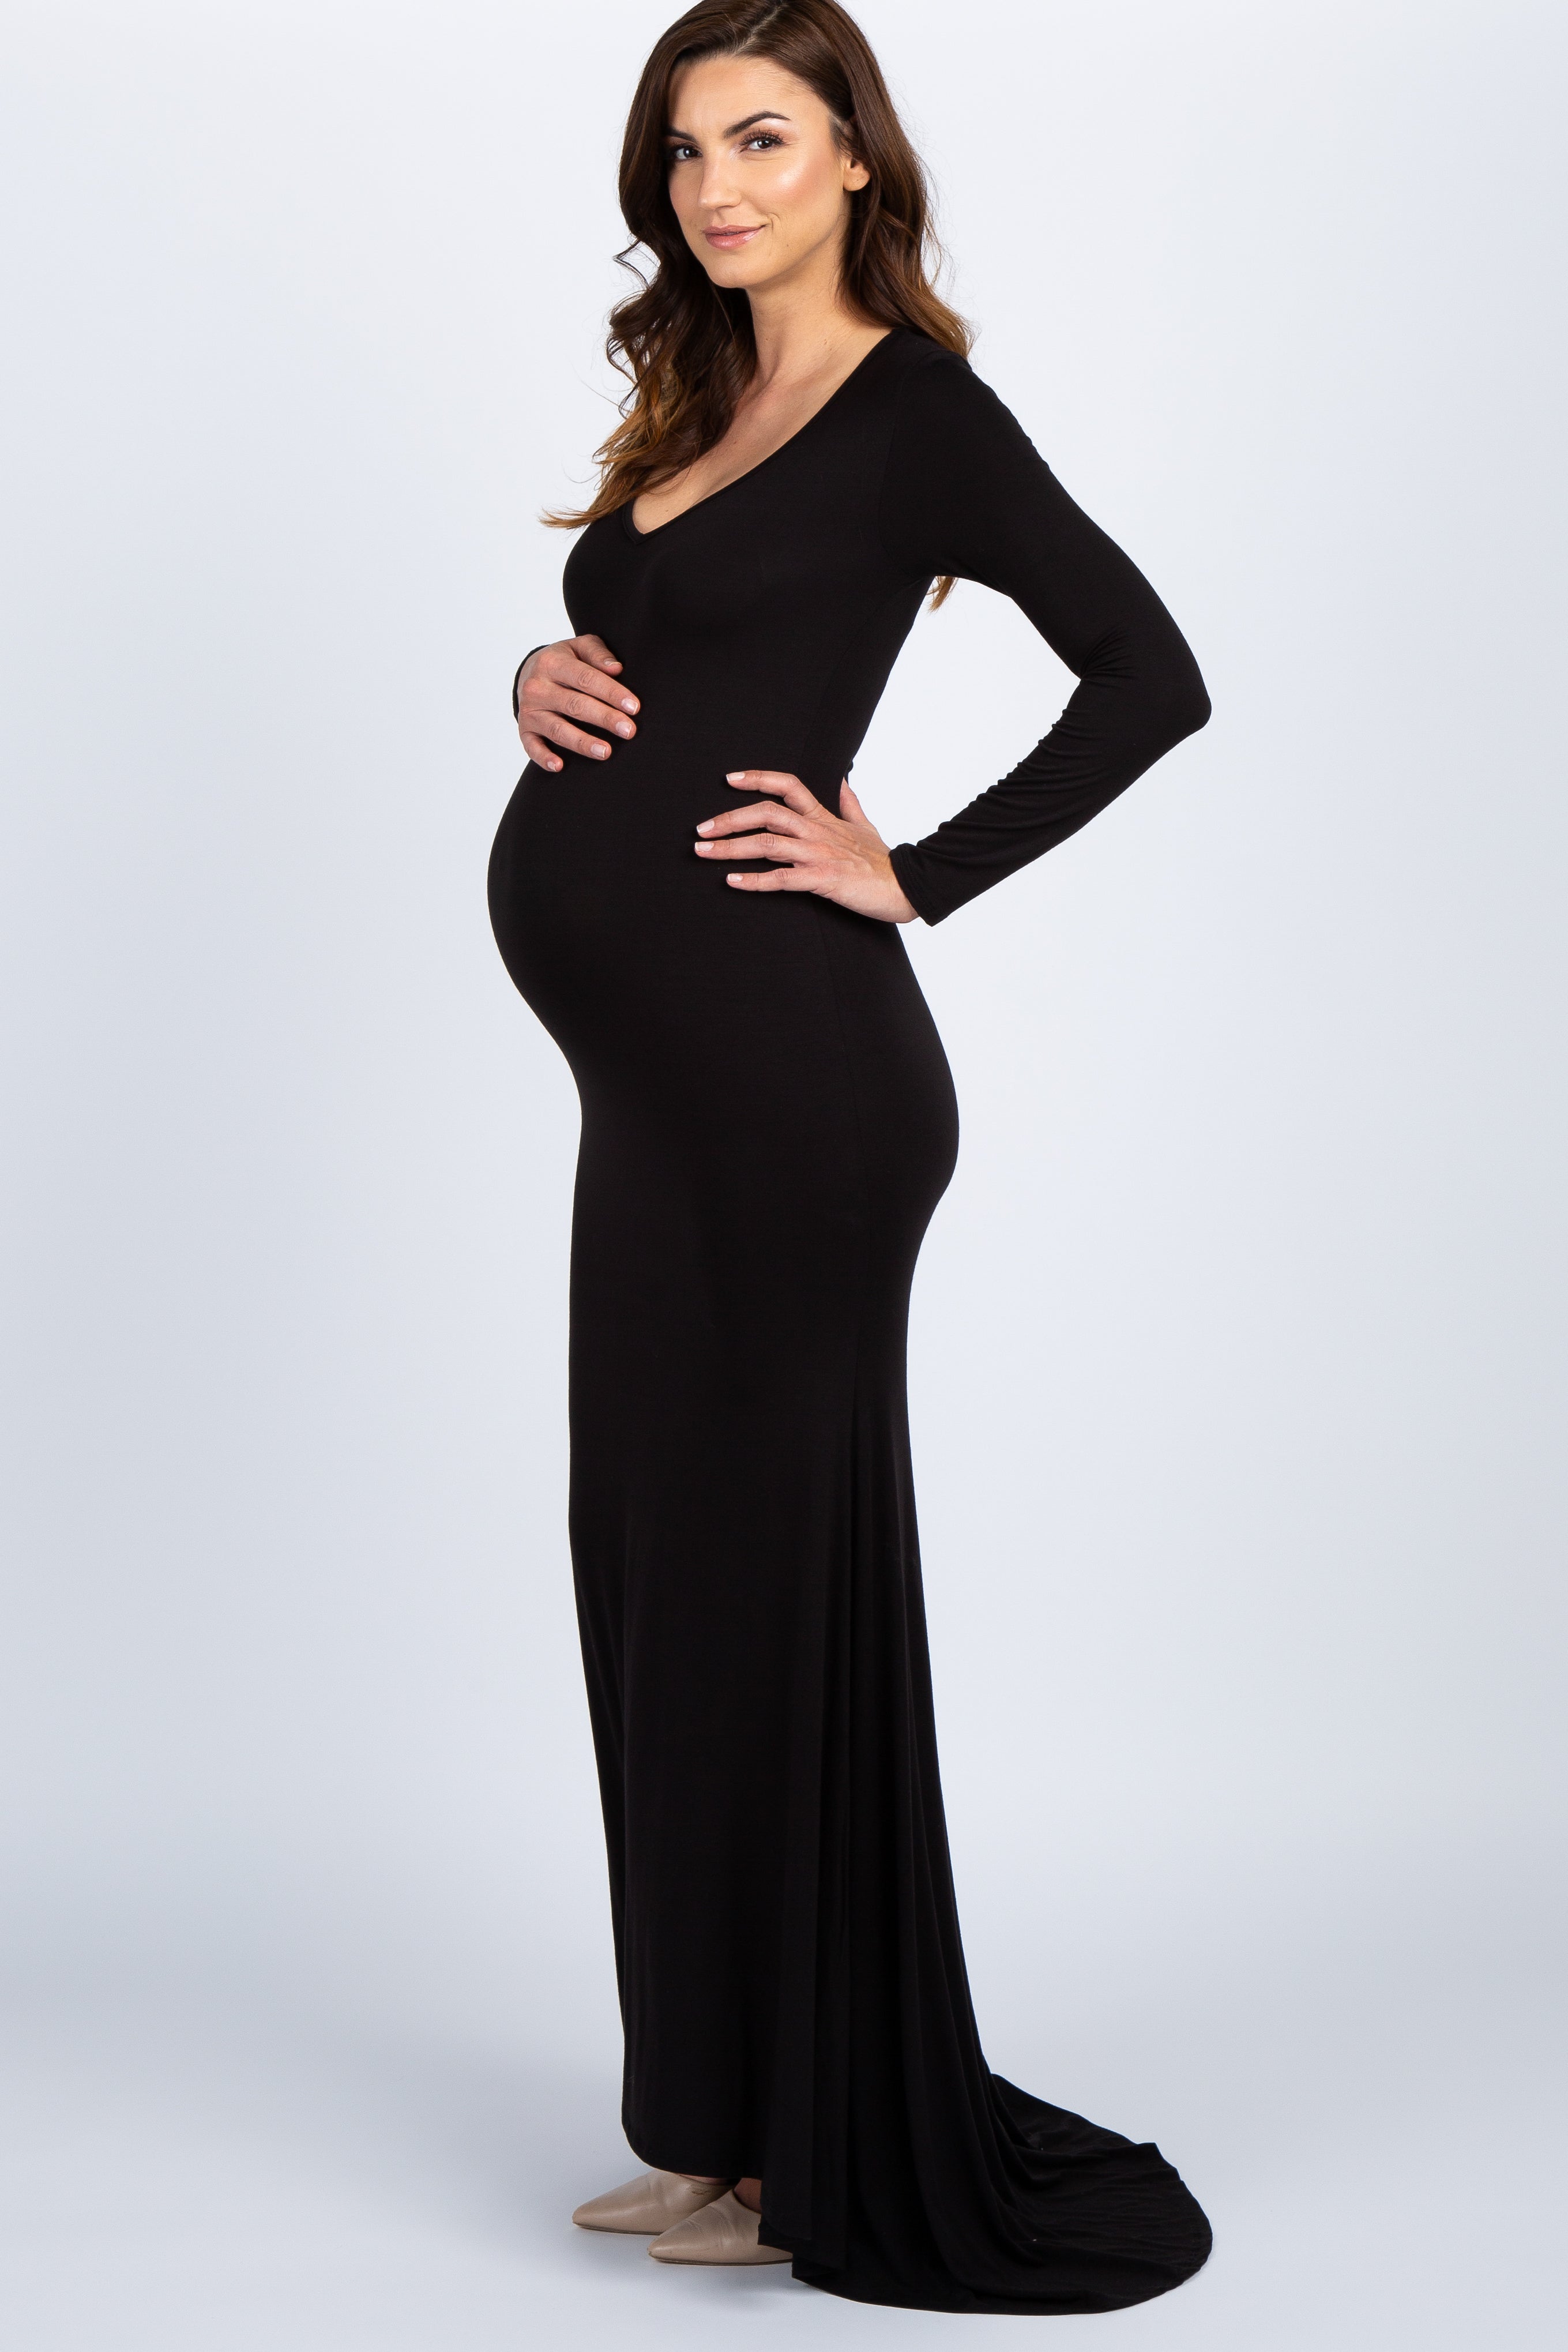 Nemi's London studio holds the largest selection of maternity photoshoot  dresses for your session. — London ​M​aternity, ​Pregnancy & London  ​N​ewborn Photography